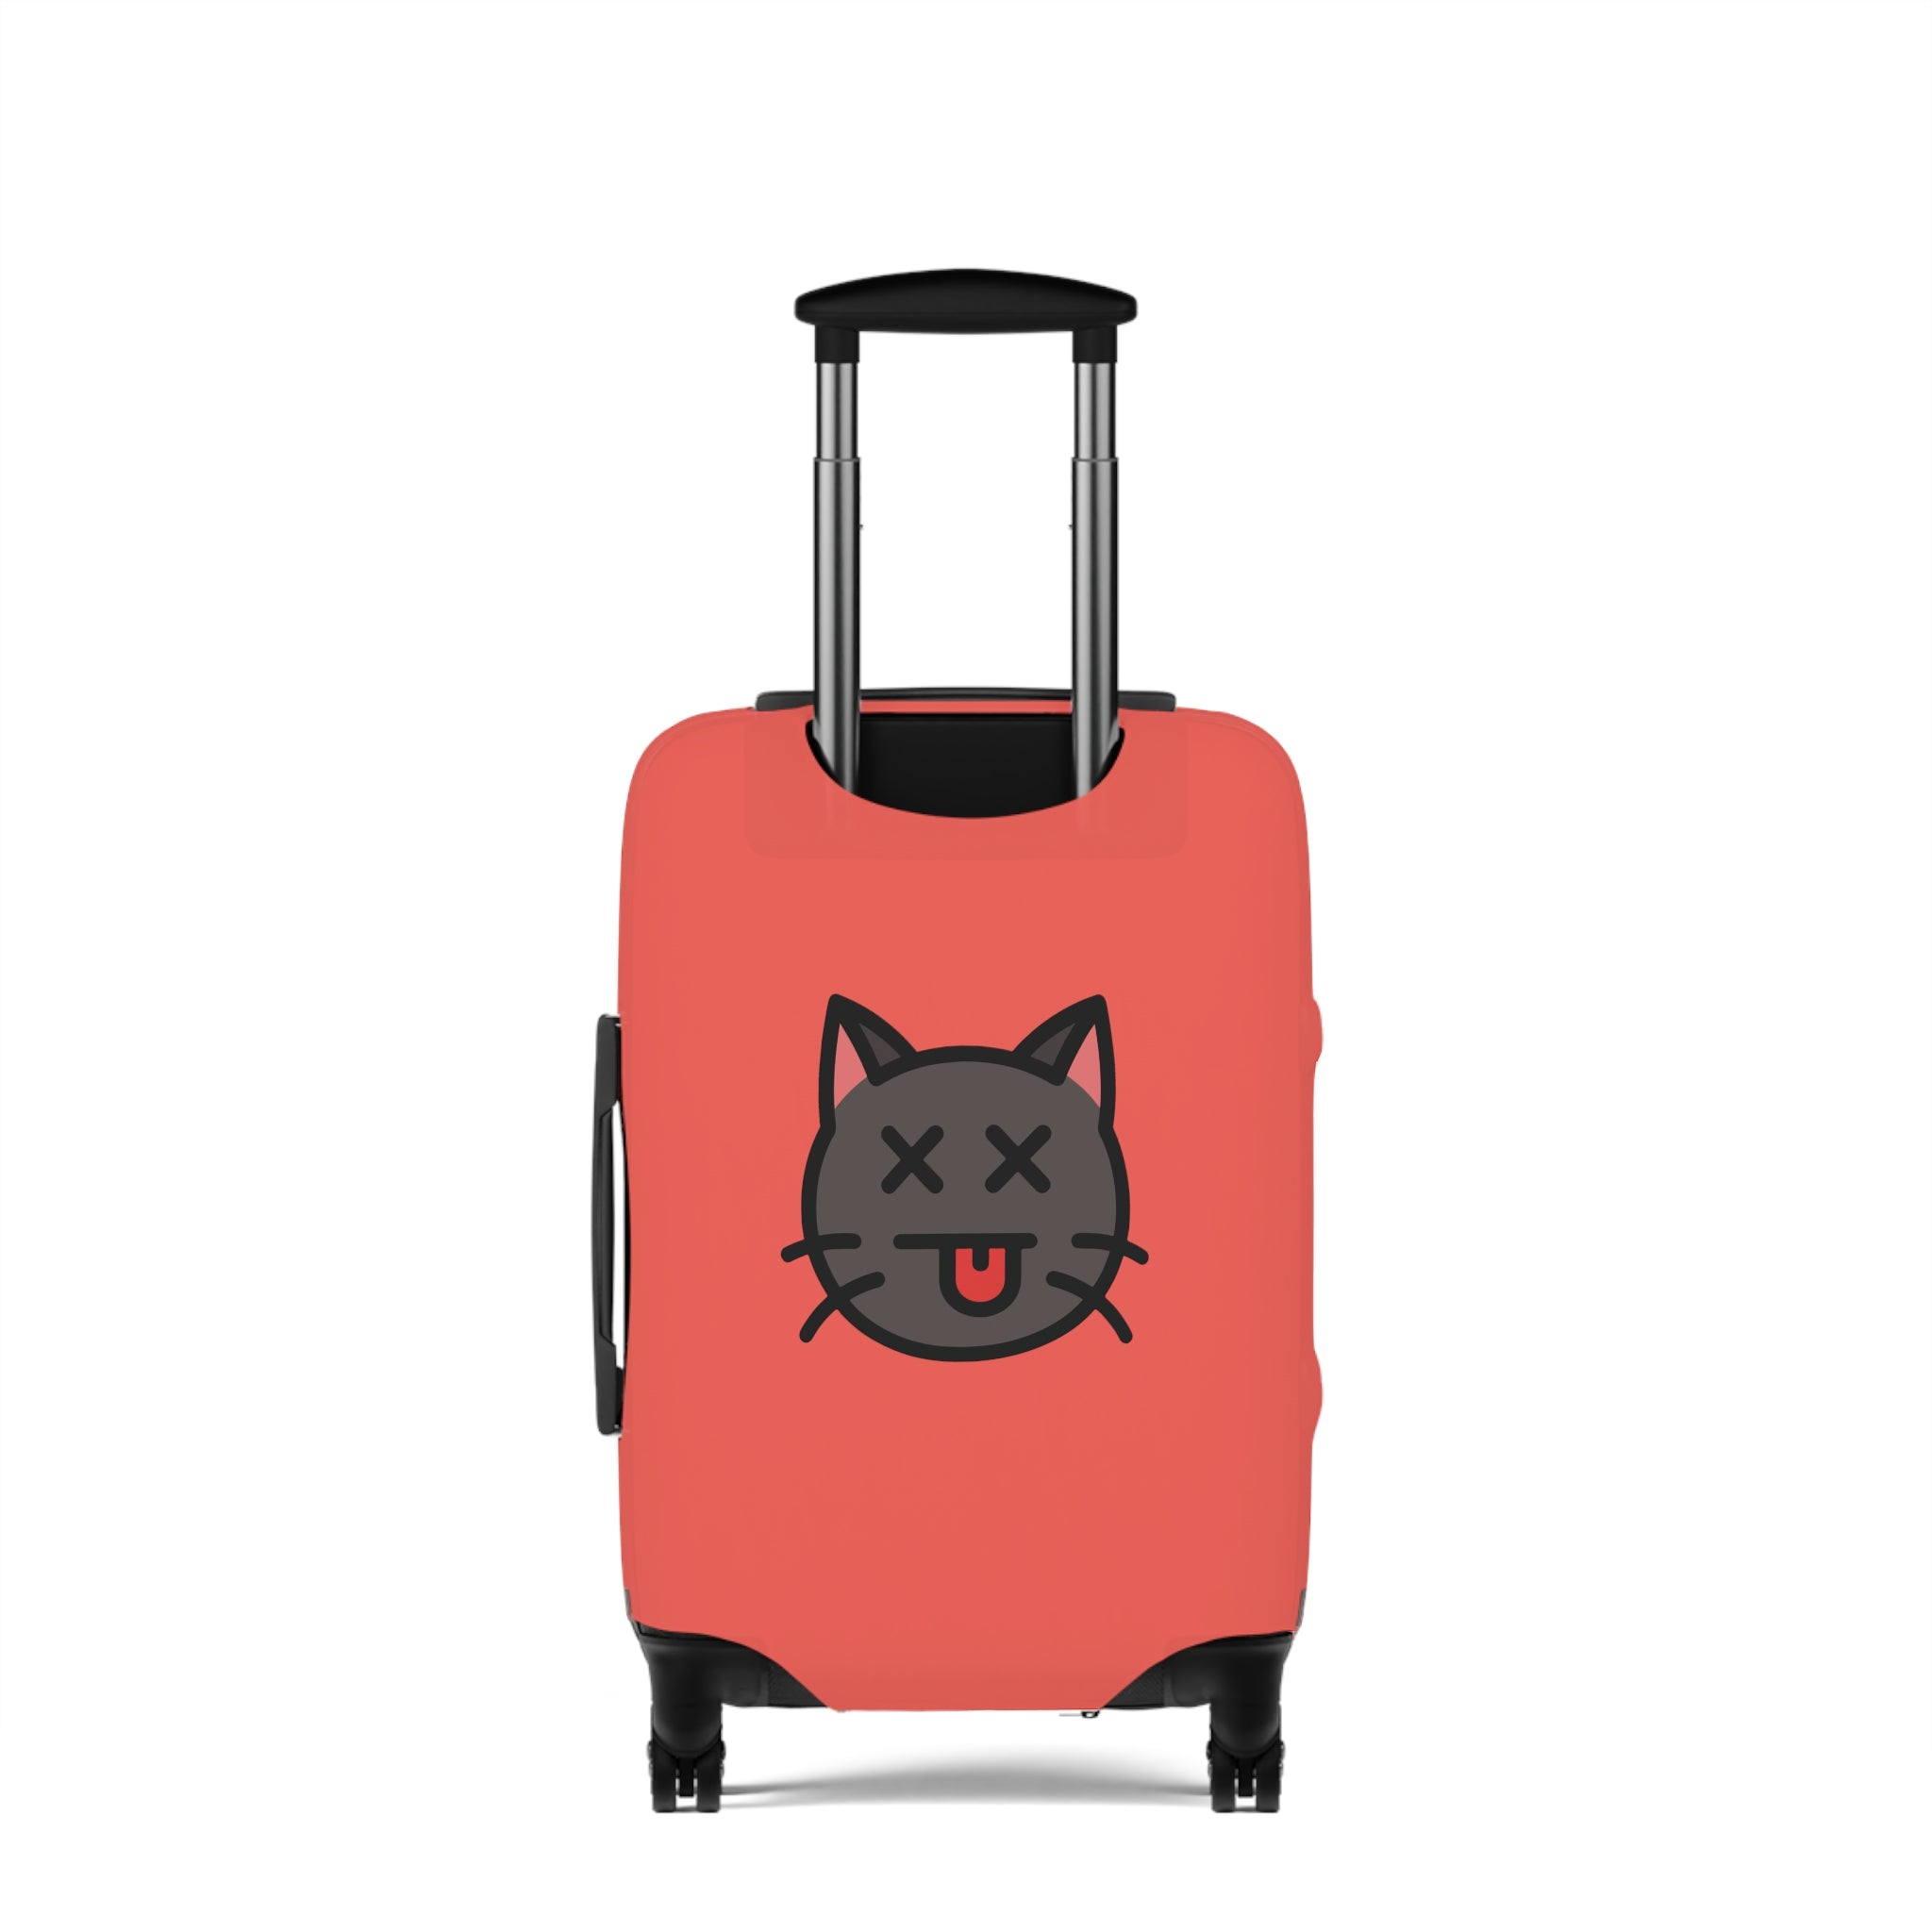 Emotional baggage Luggage Cover (Red)